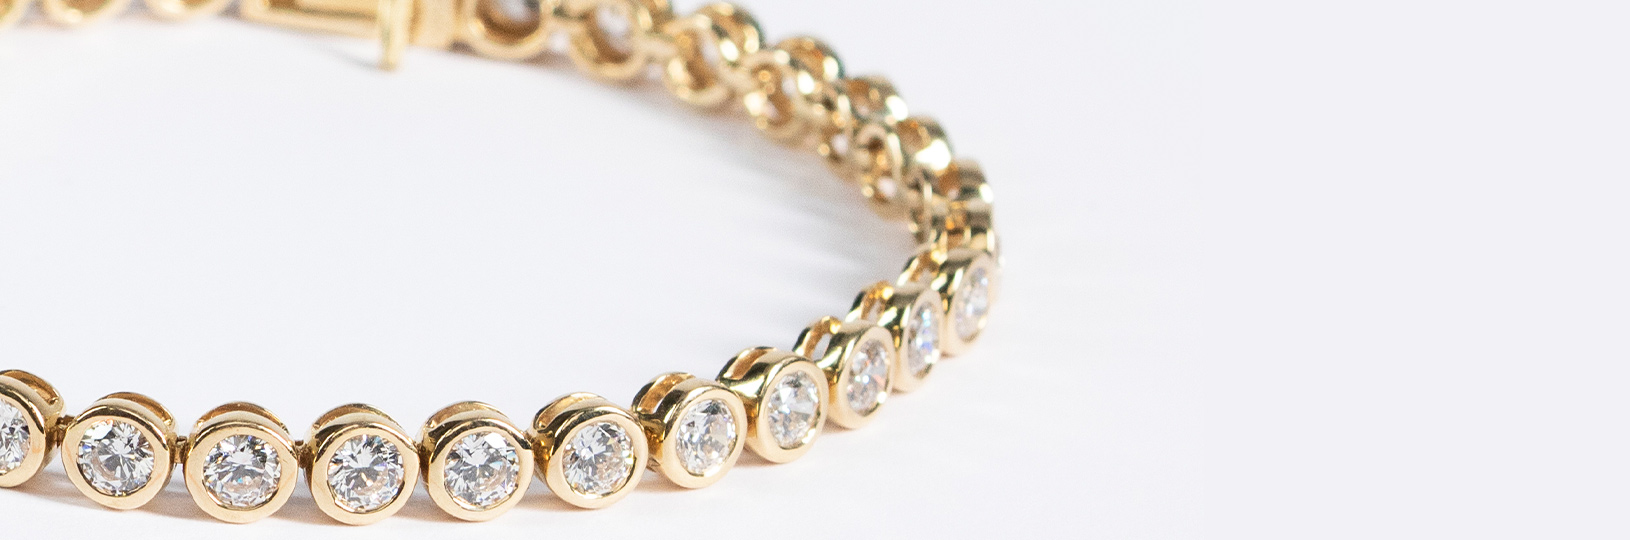 A yellow gold bracelet featuring several round cut diamonds